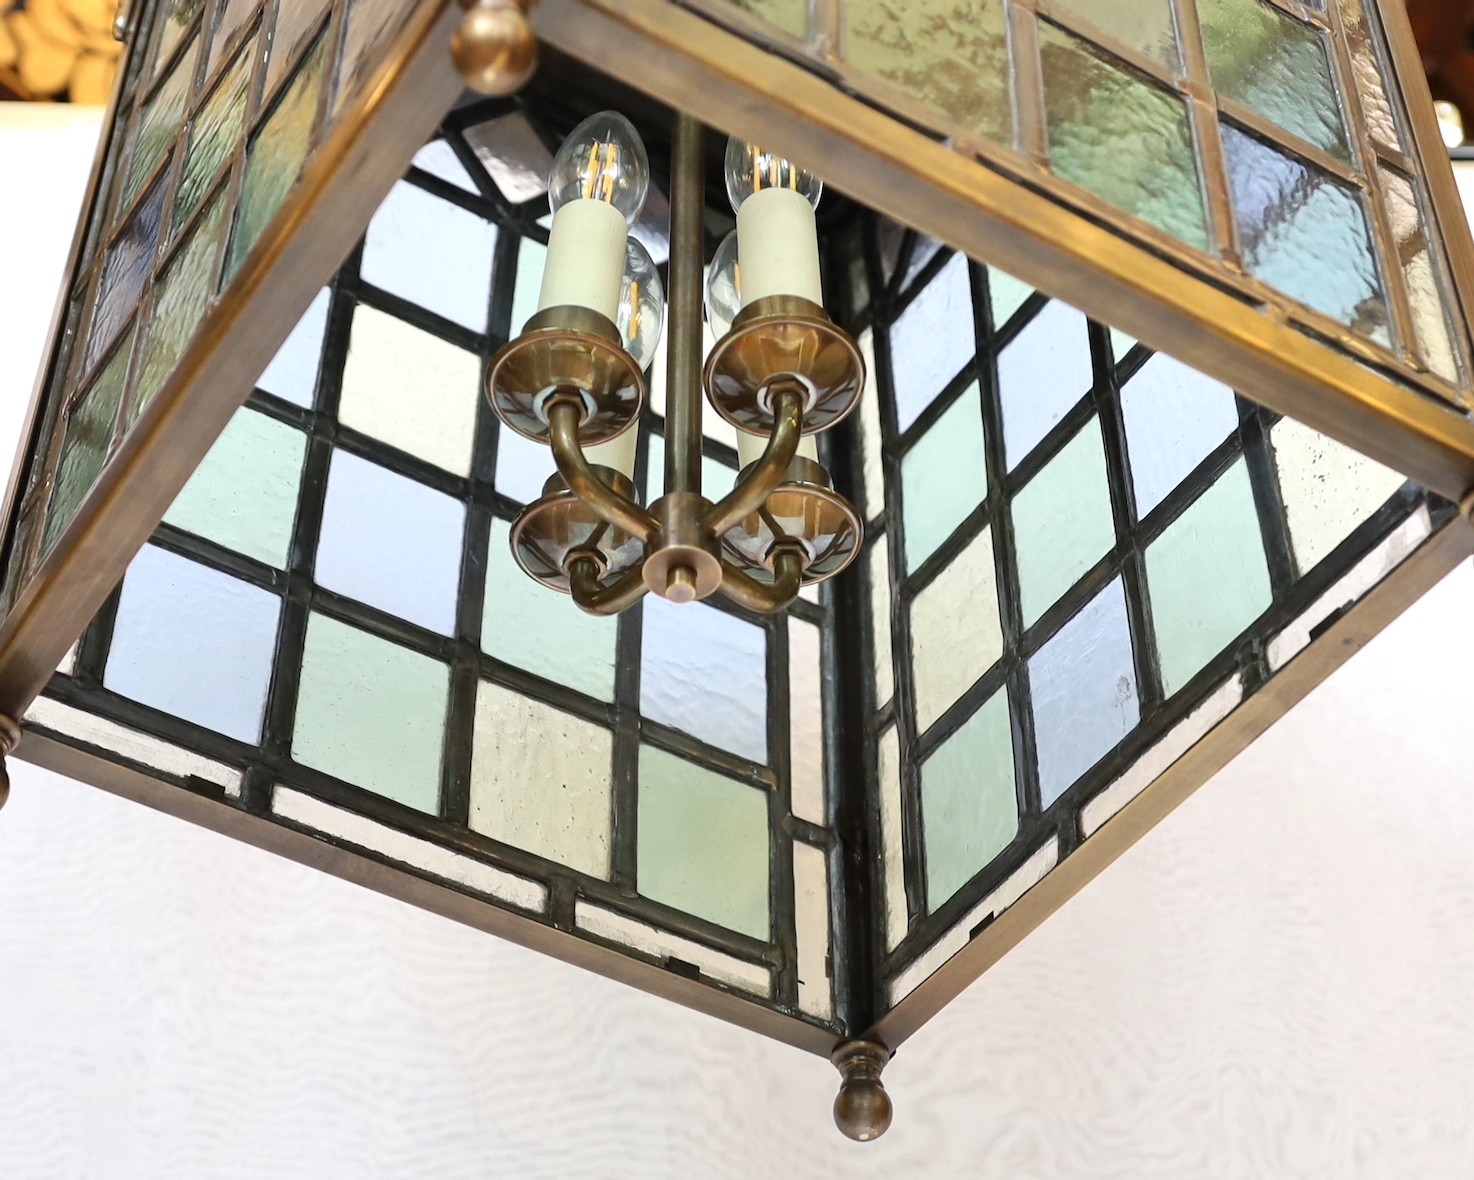 A large Edwardian lacquered brass and leaded glass hall lantern applied with rams head motifs, height 70cm. width 46cm